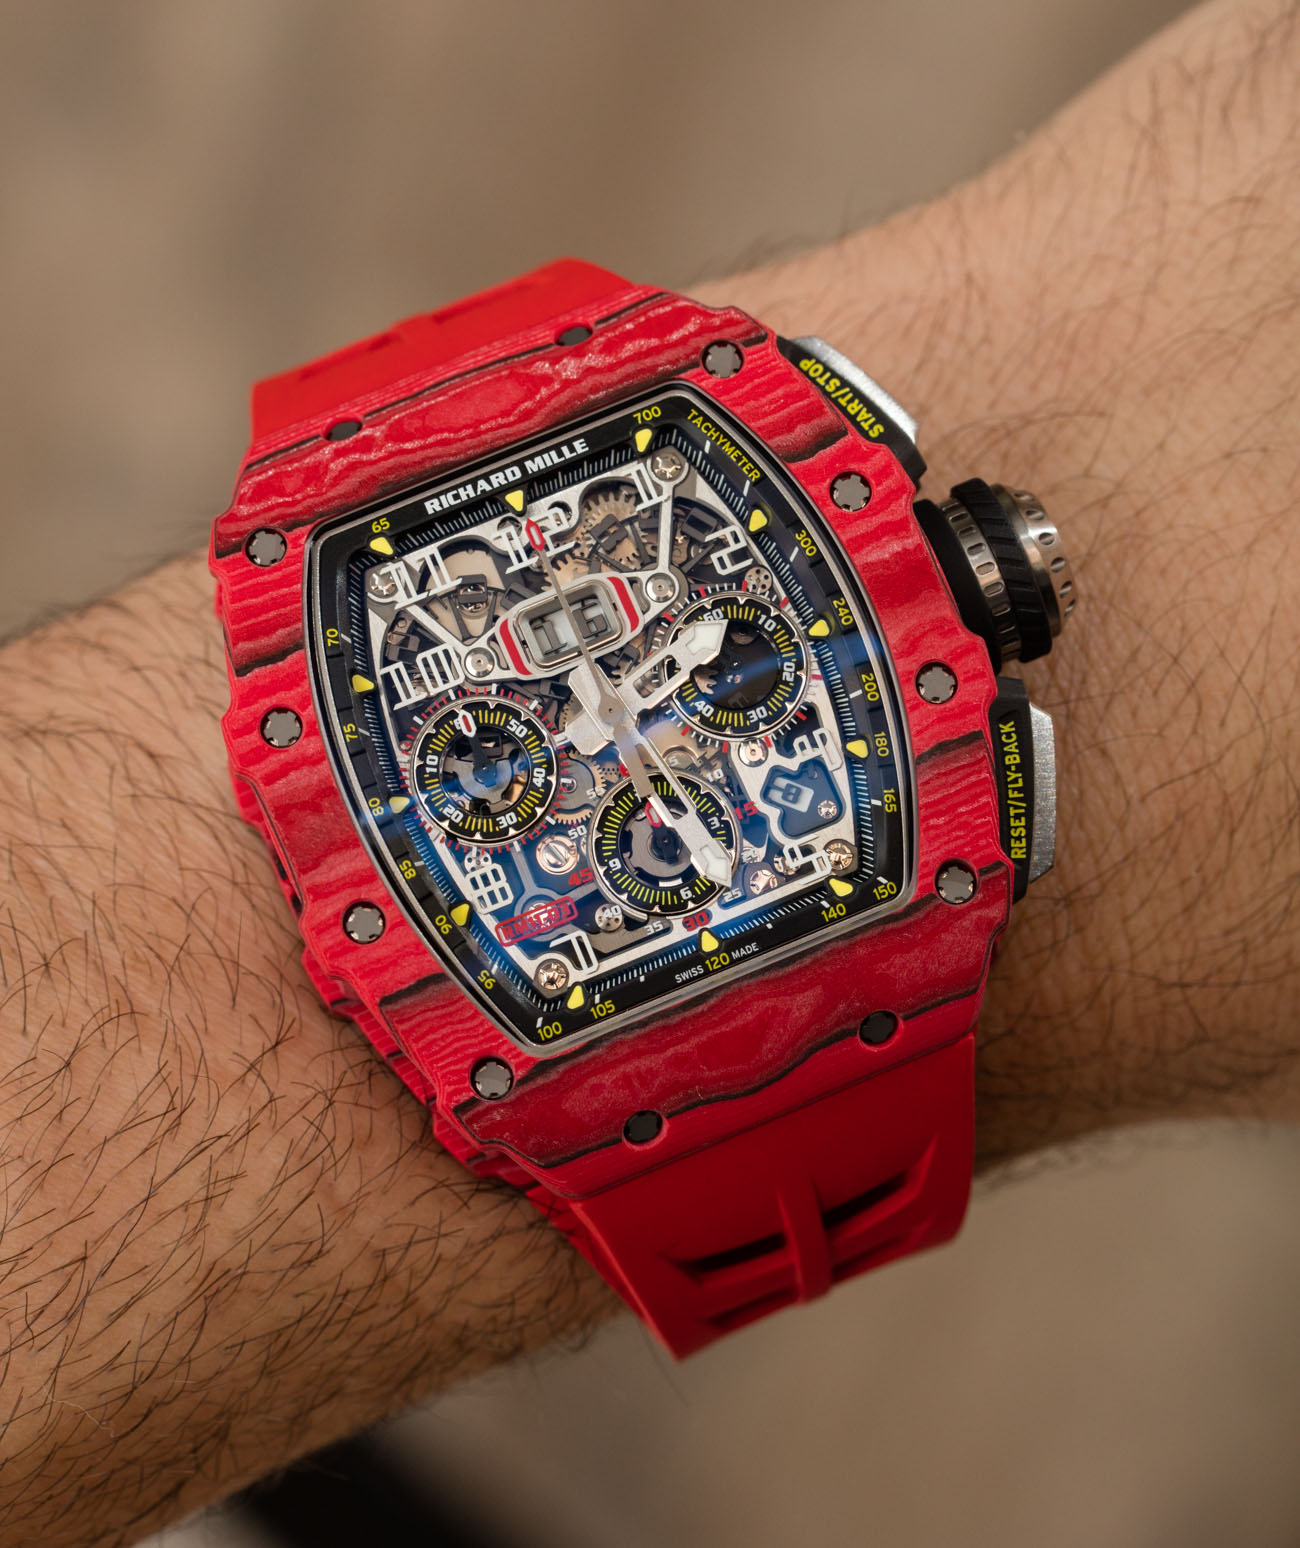 Richard Mille RM 11-03 Automatic Flyback Chronograph Red Quartz FQ TPT